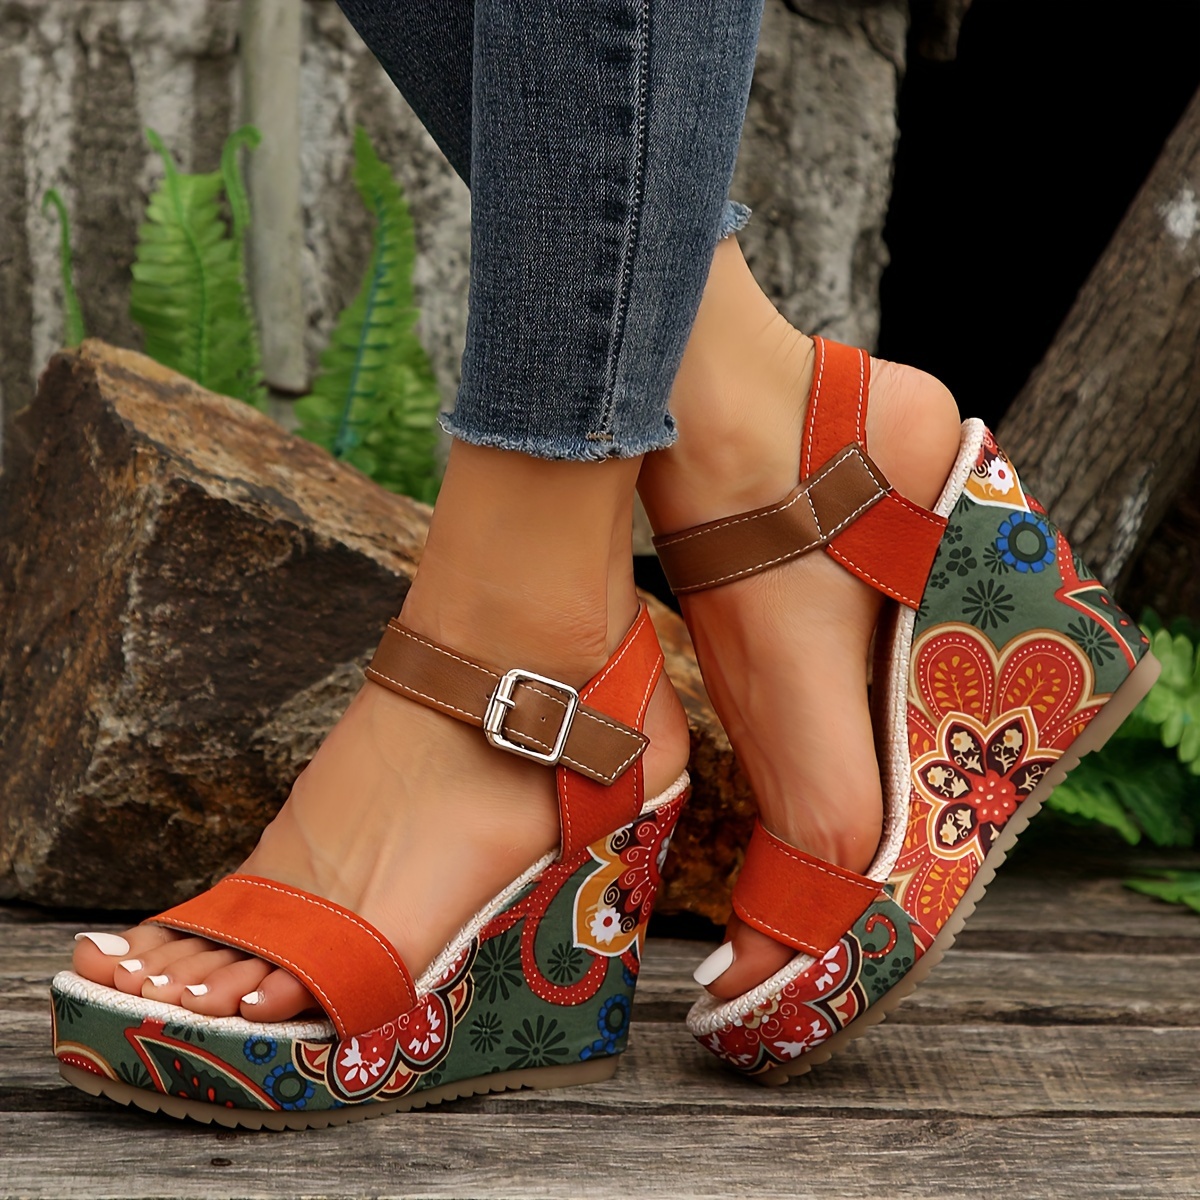 40 Fashionable Wedges Heels To Accentuate The Charm In You